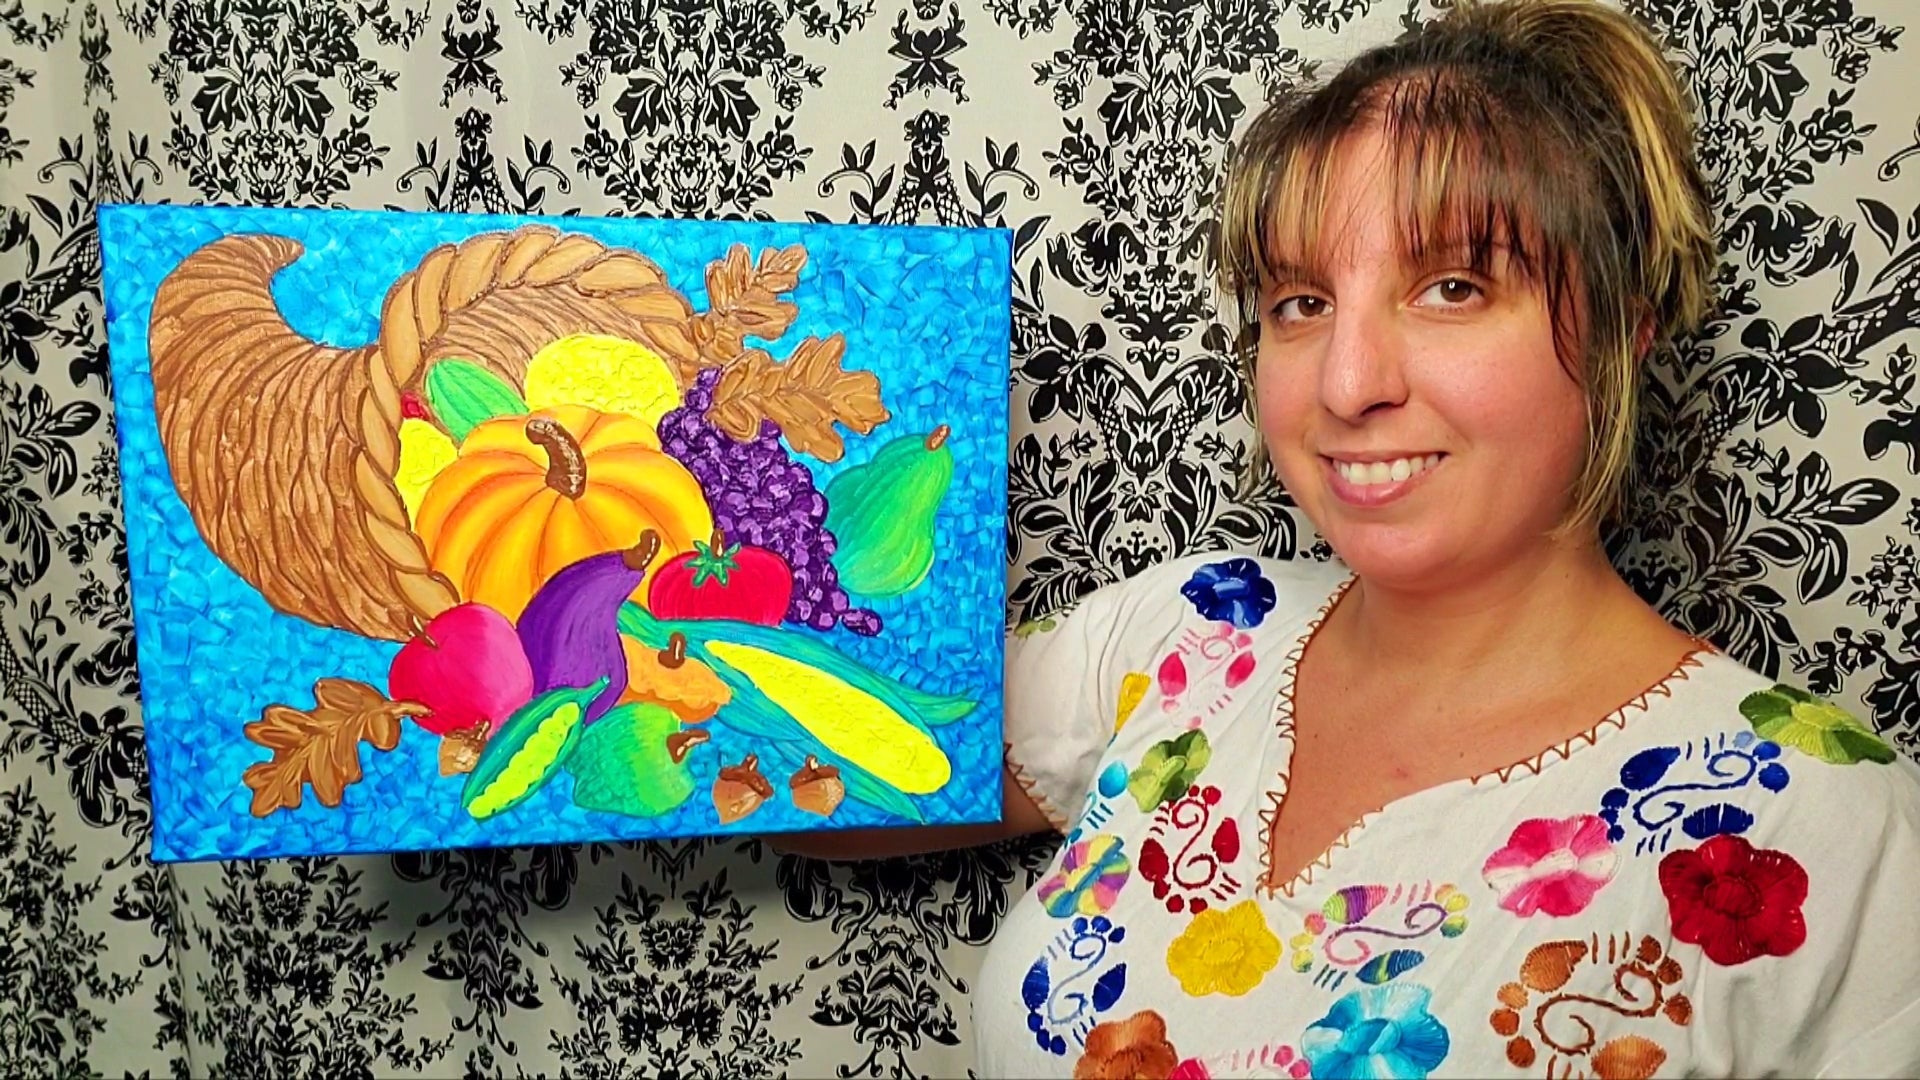 Cornecopia Painting Class How To Paint Easy Paint And Sip Acrylic Art